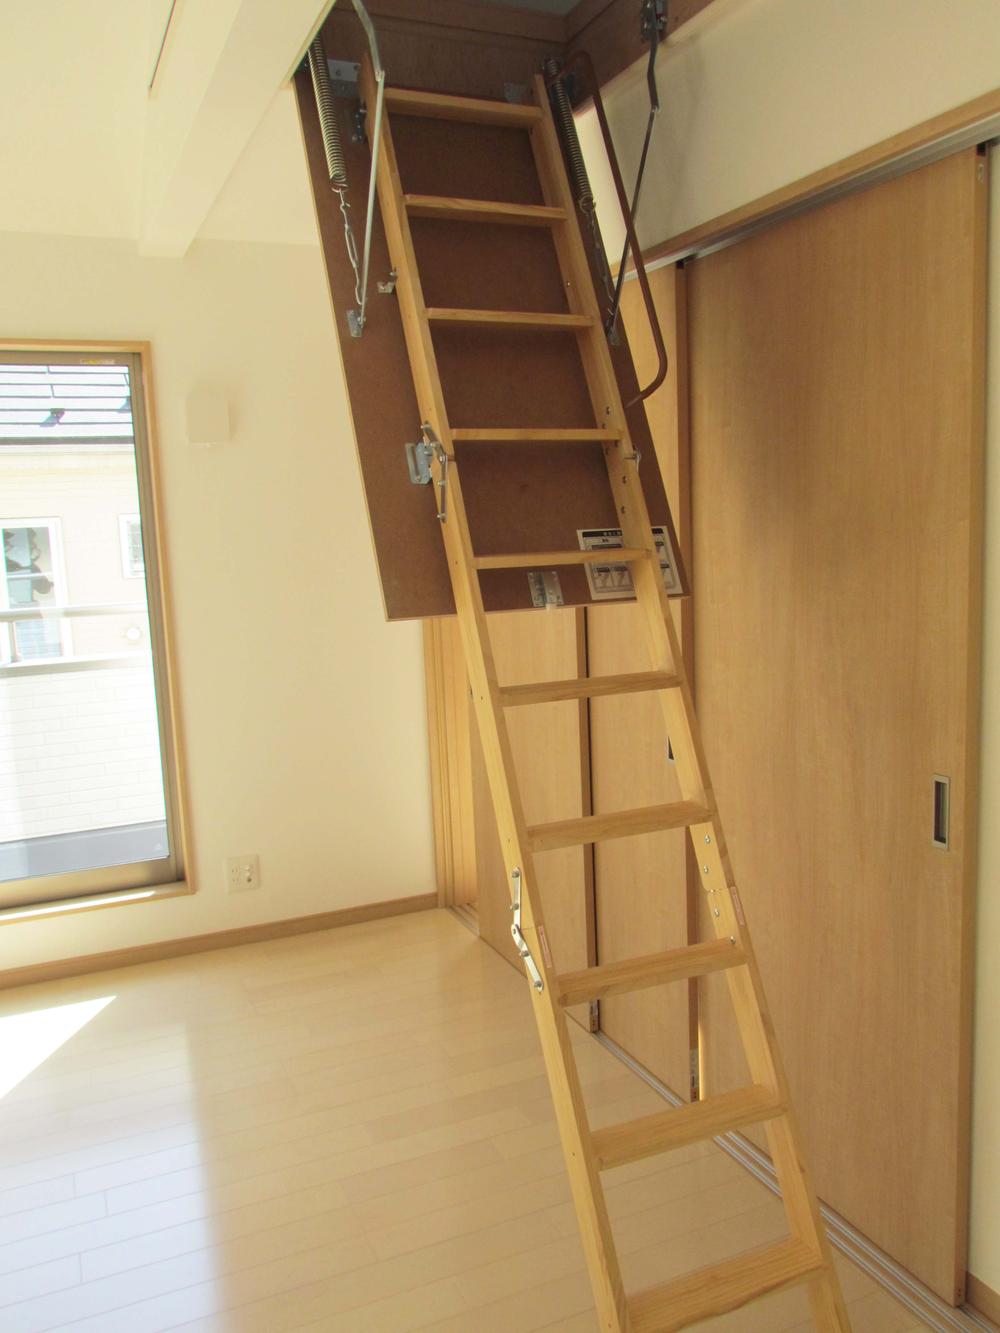 Other introspection. ● retractable ladder to the attic storage